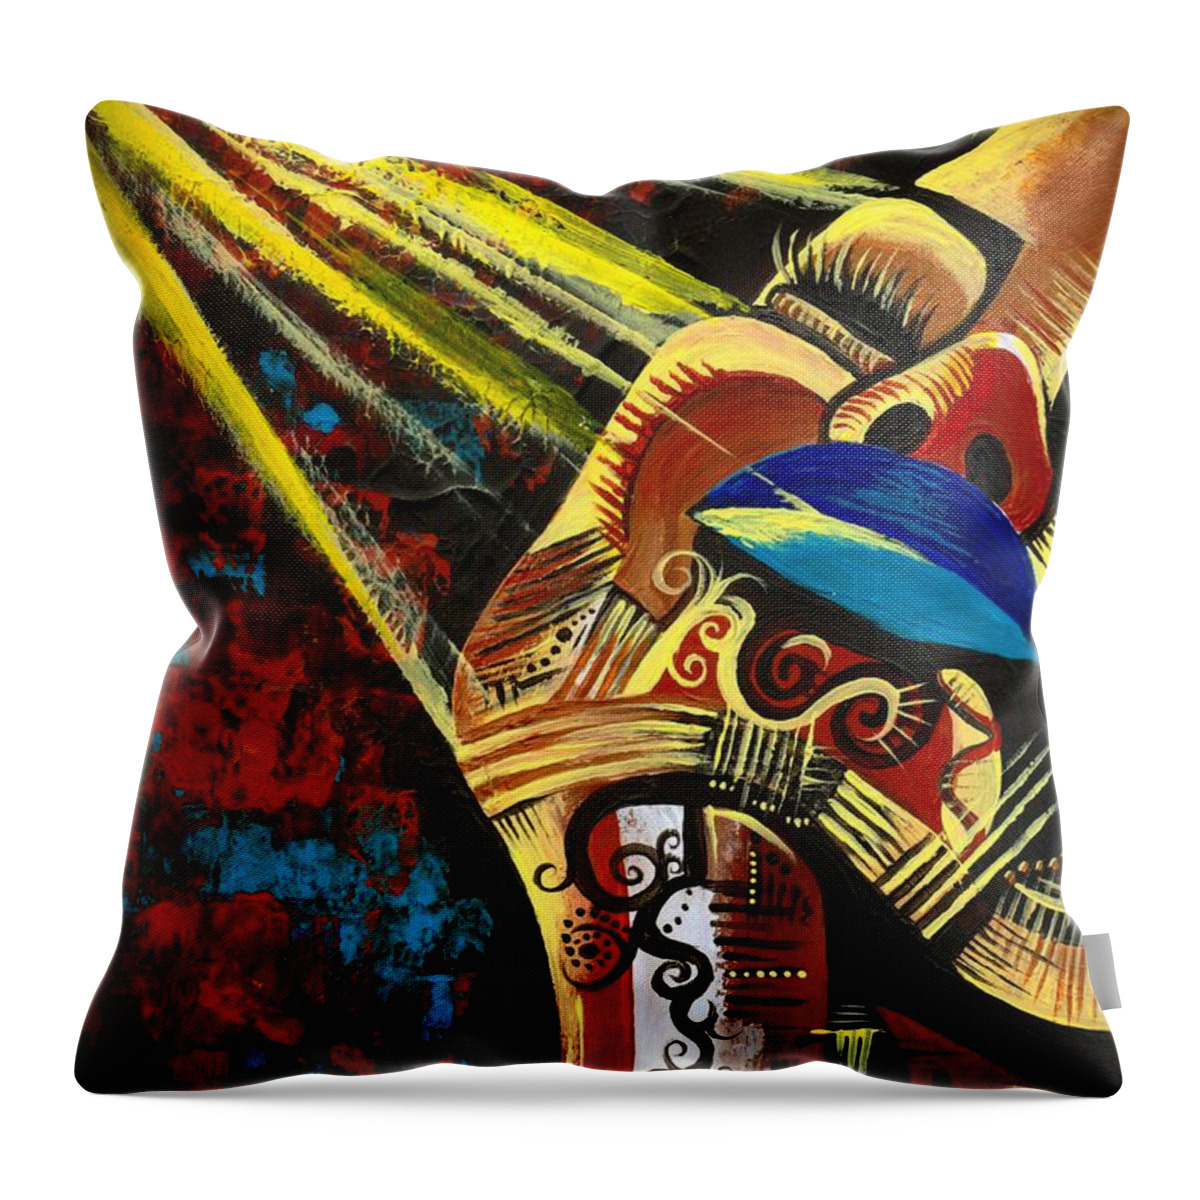 Artbyria Throw Pillow featuring the photograph Feeling Good by Artist RiA